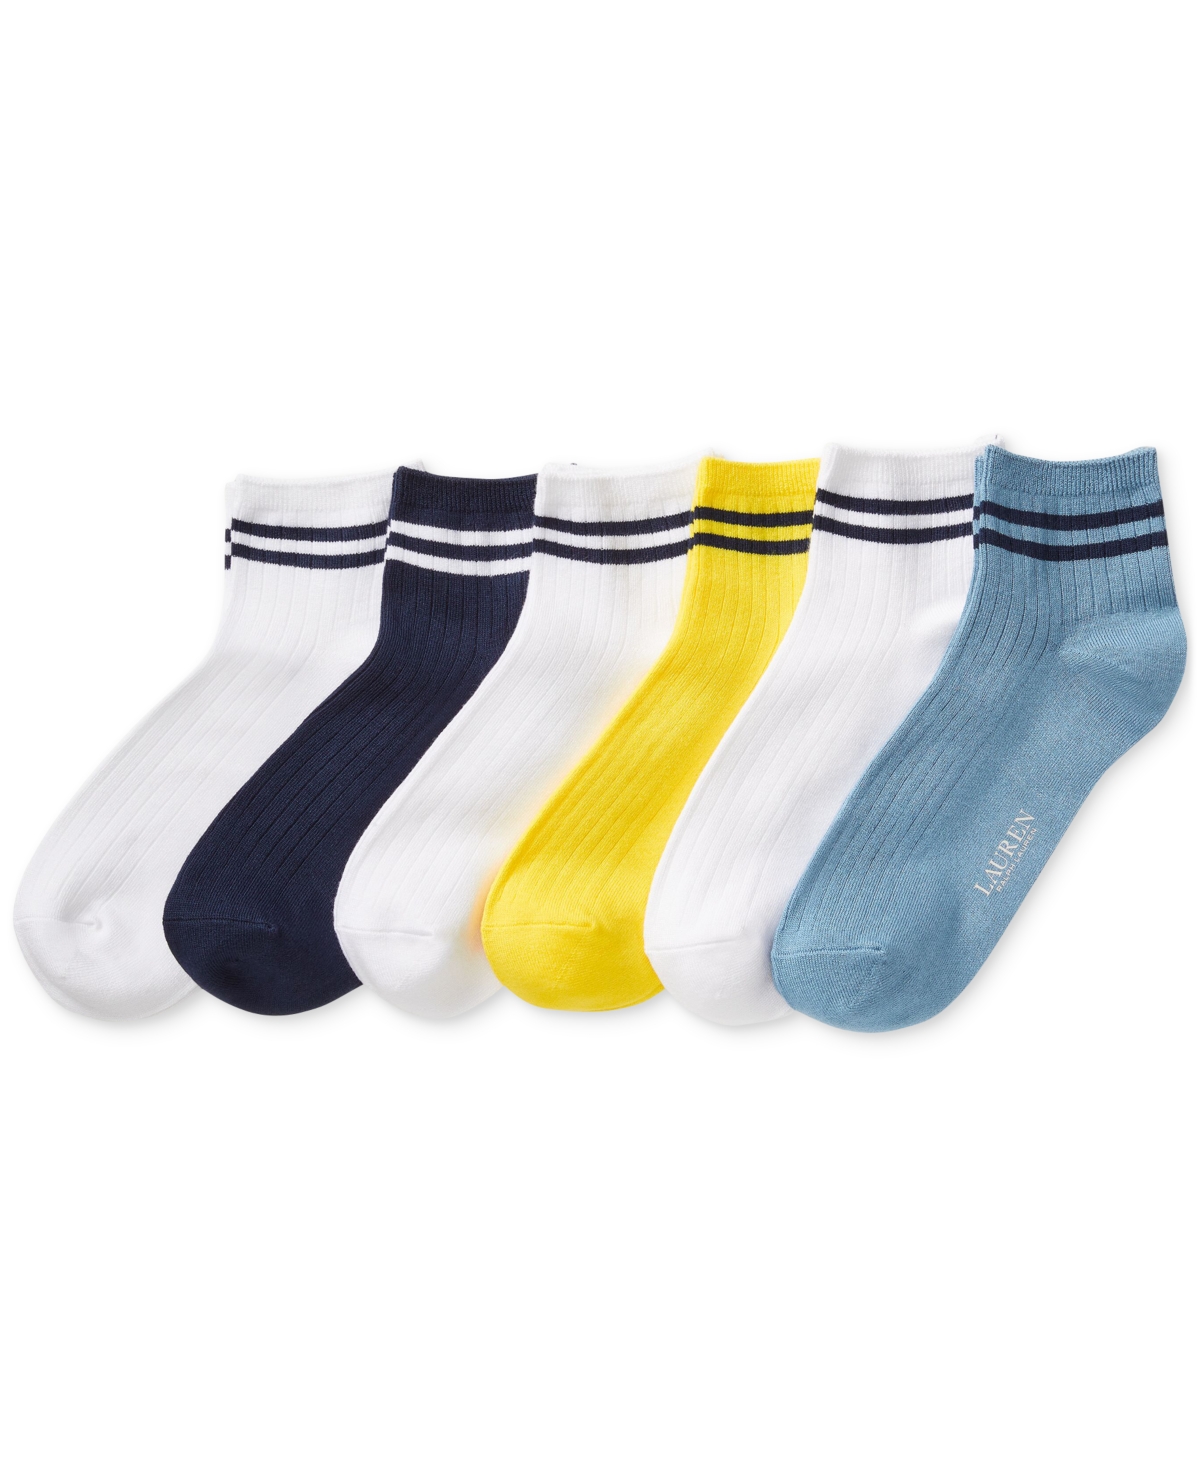 Women's 6-Pk. Ribbed Striped Cuff Ankle Socks - Assorted